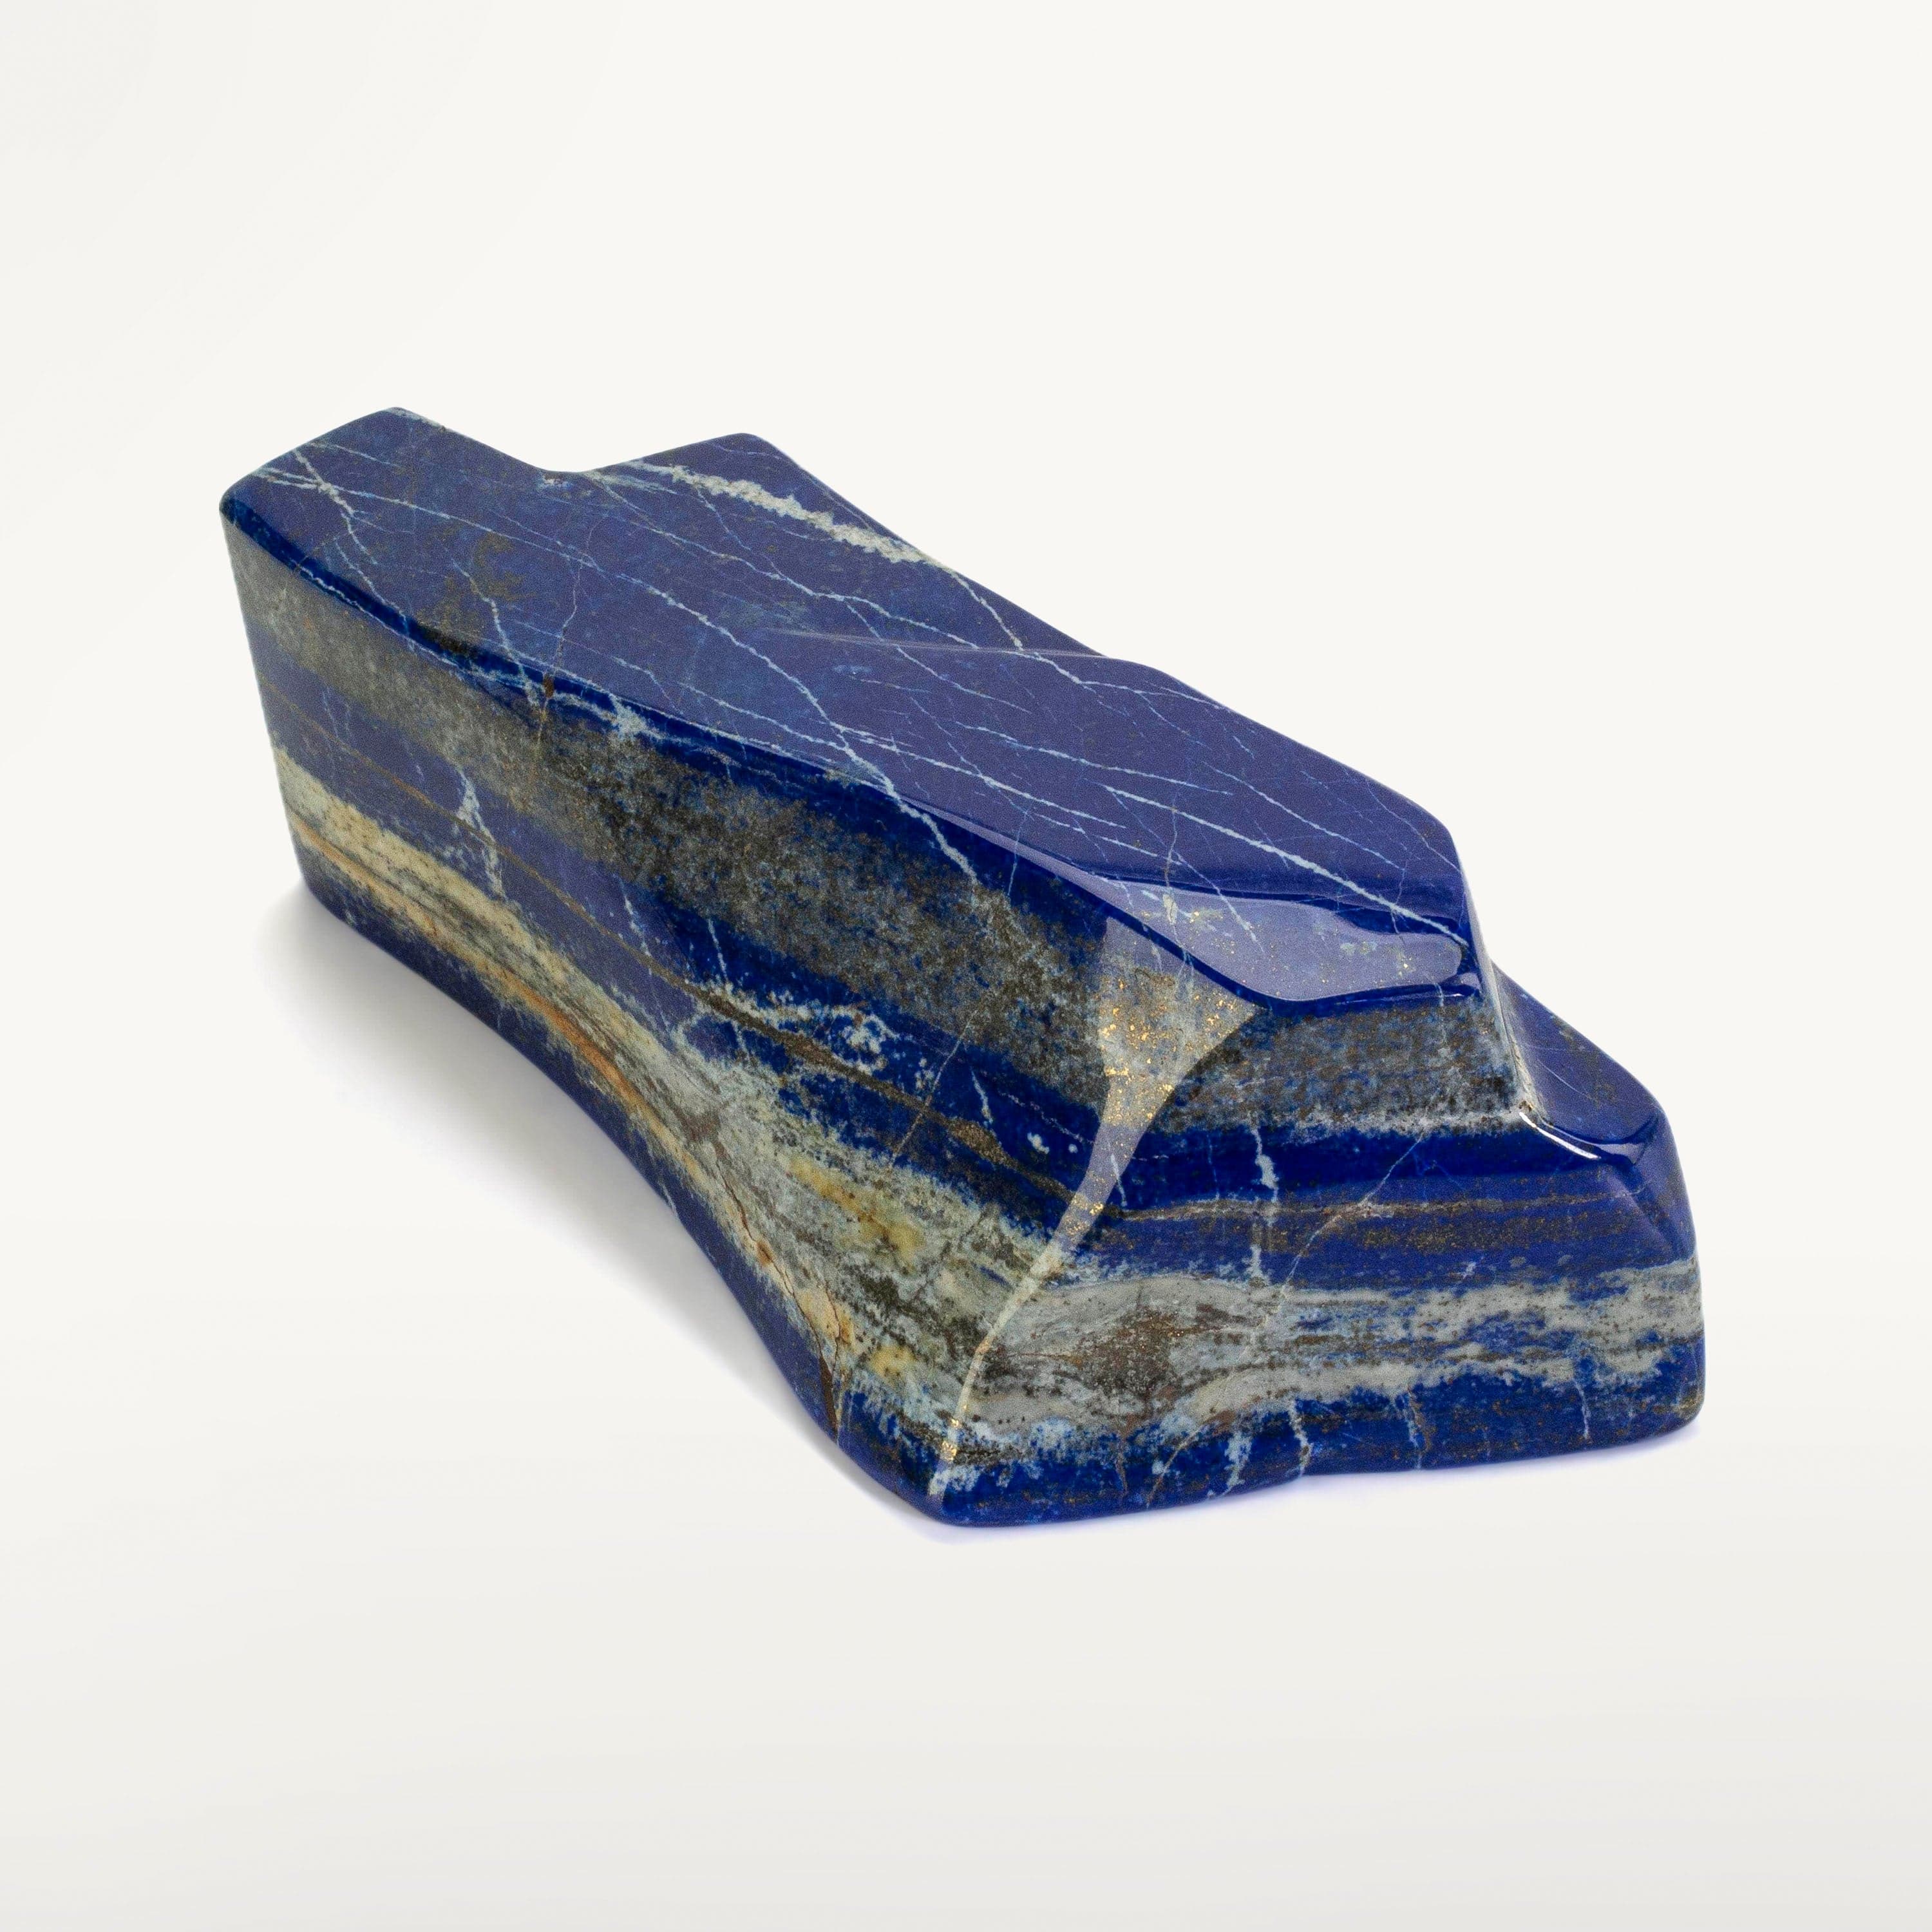 Kalifano Lapis Lapis Lazuil Freeform from Afghanistan - 1.5 kg / 3.3 lbs LP1600.003